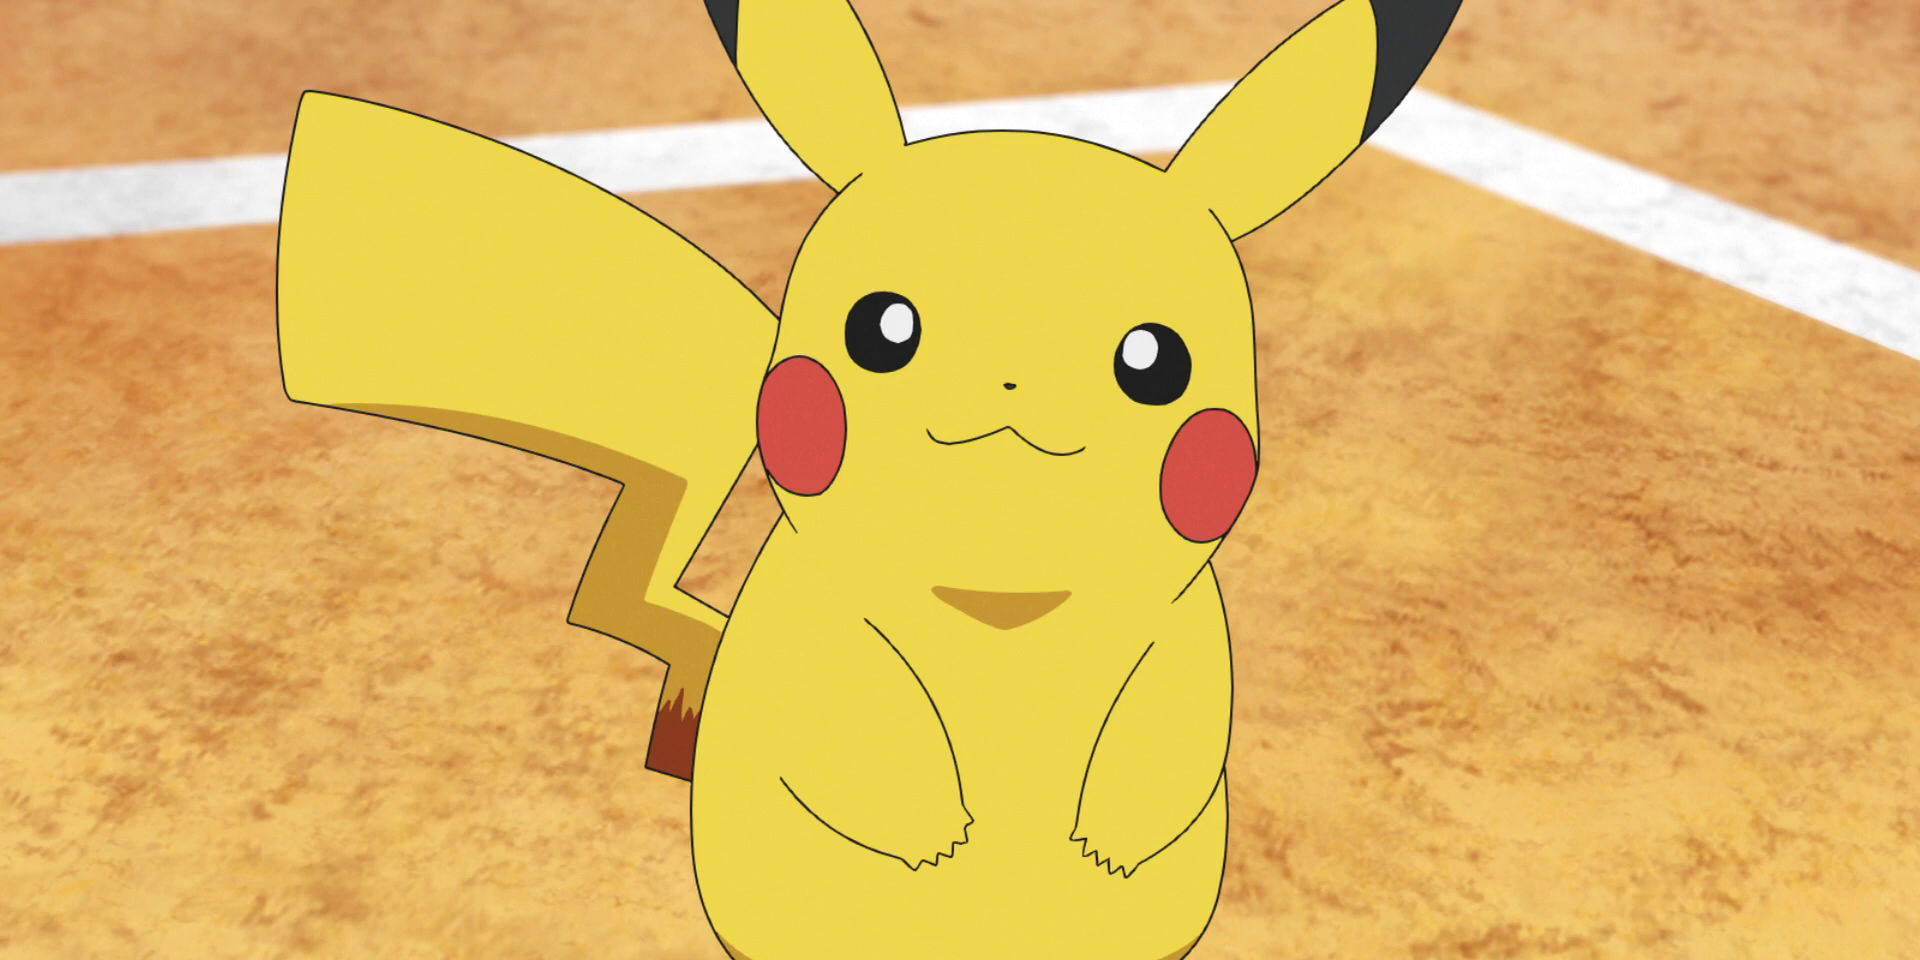 It's Ash's Pikachu from the Pokémon television series